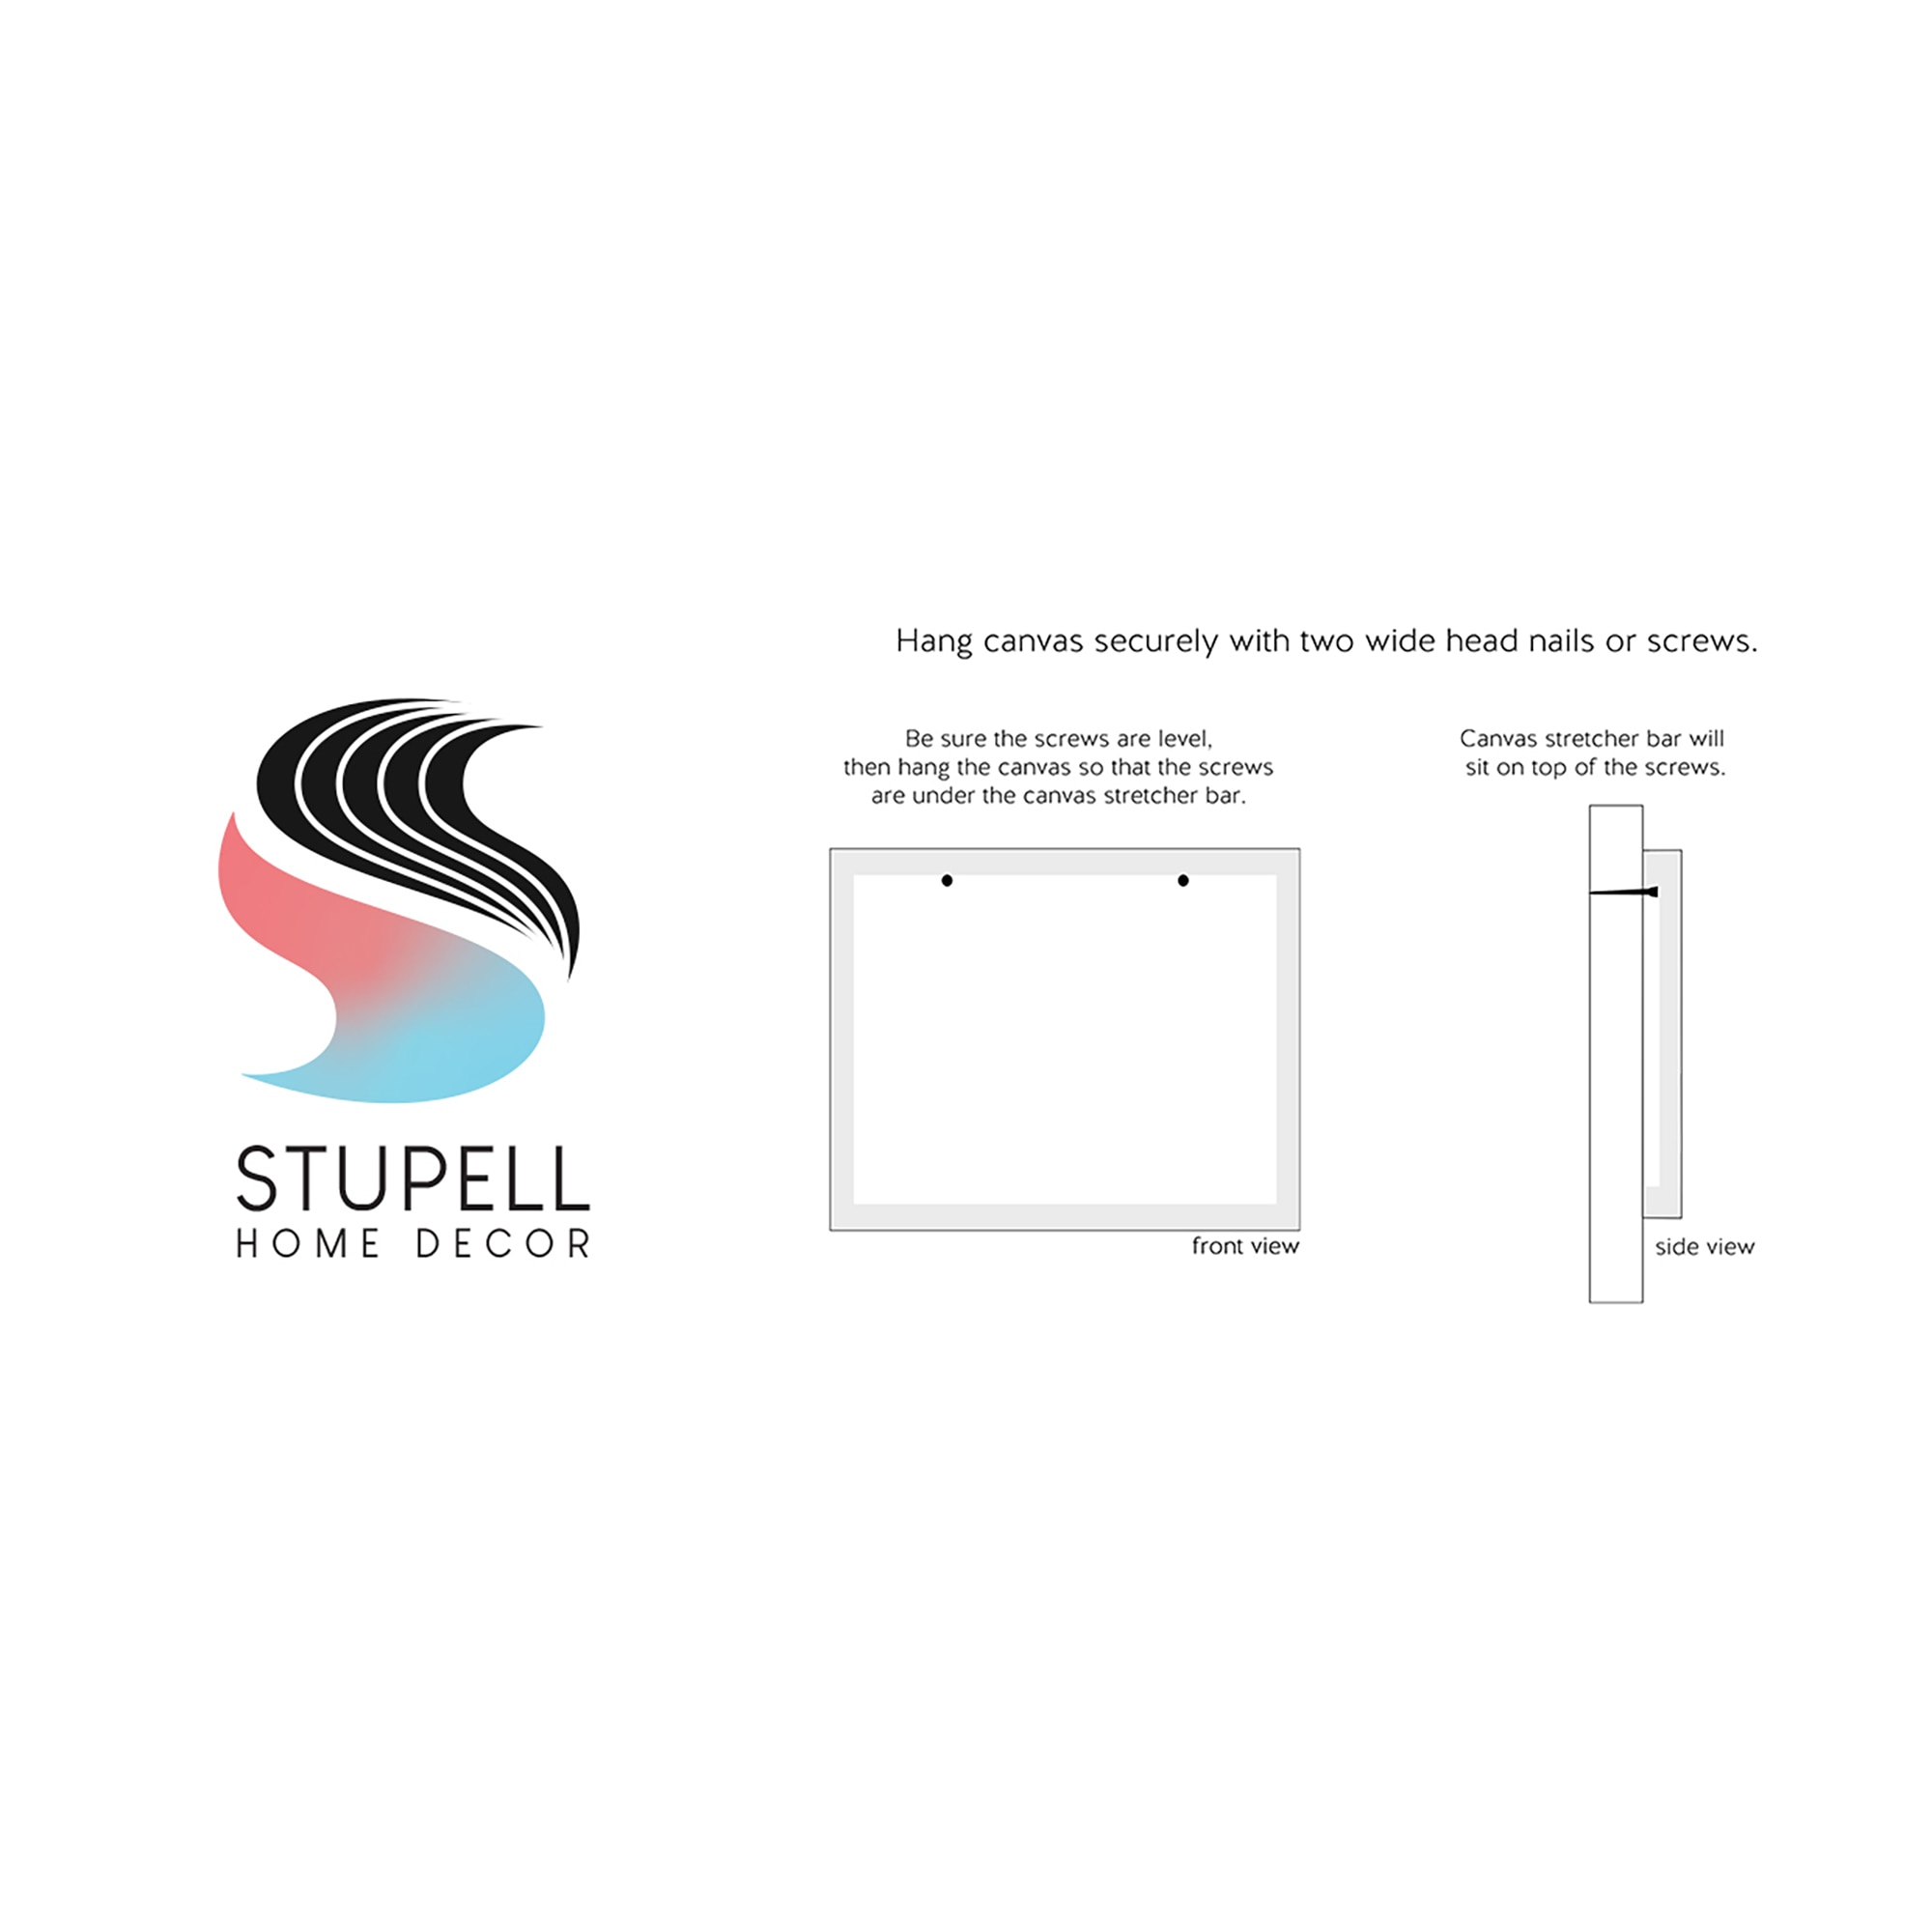 The Stupell Home Decor Black and White High Fashion Store Front Canvas Wall Art